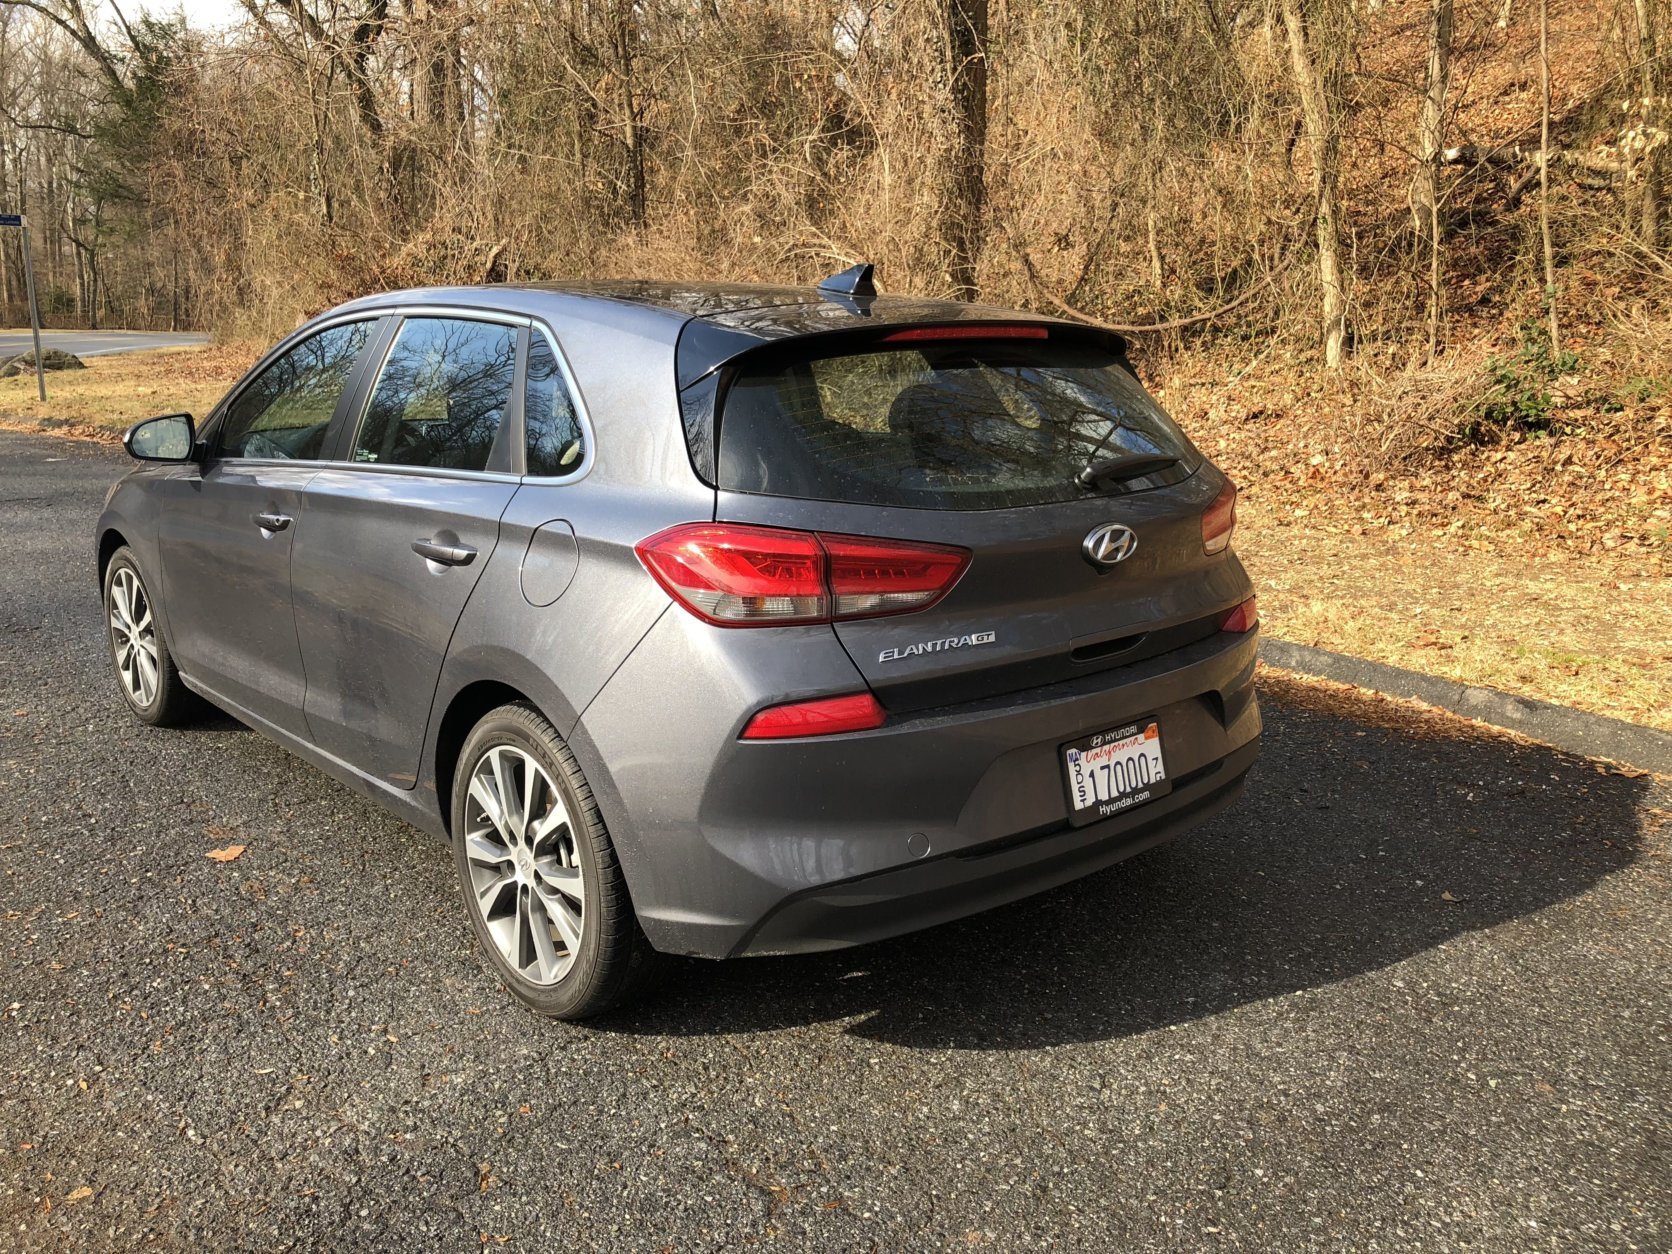 Usually, the rear end styling is bland, but the Elantra GT has some interesting shapes, especially below the rear hatch. (WTOP/Mike Parris)